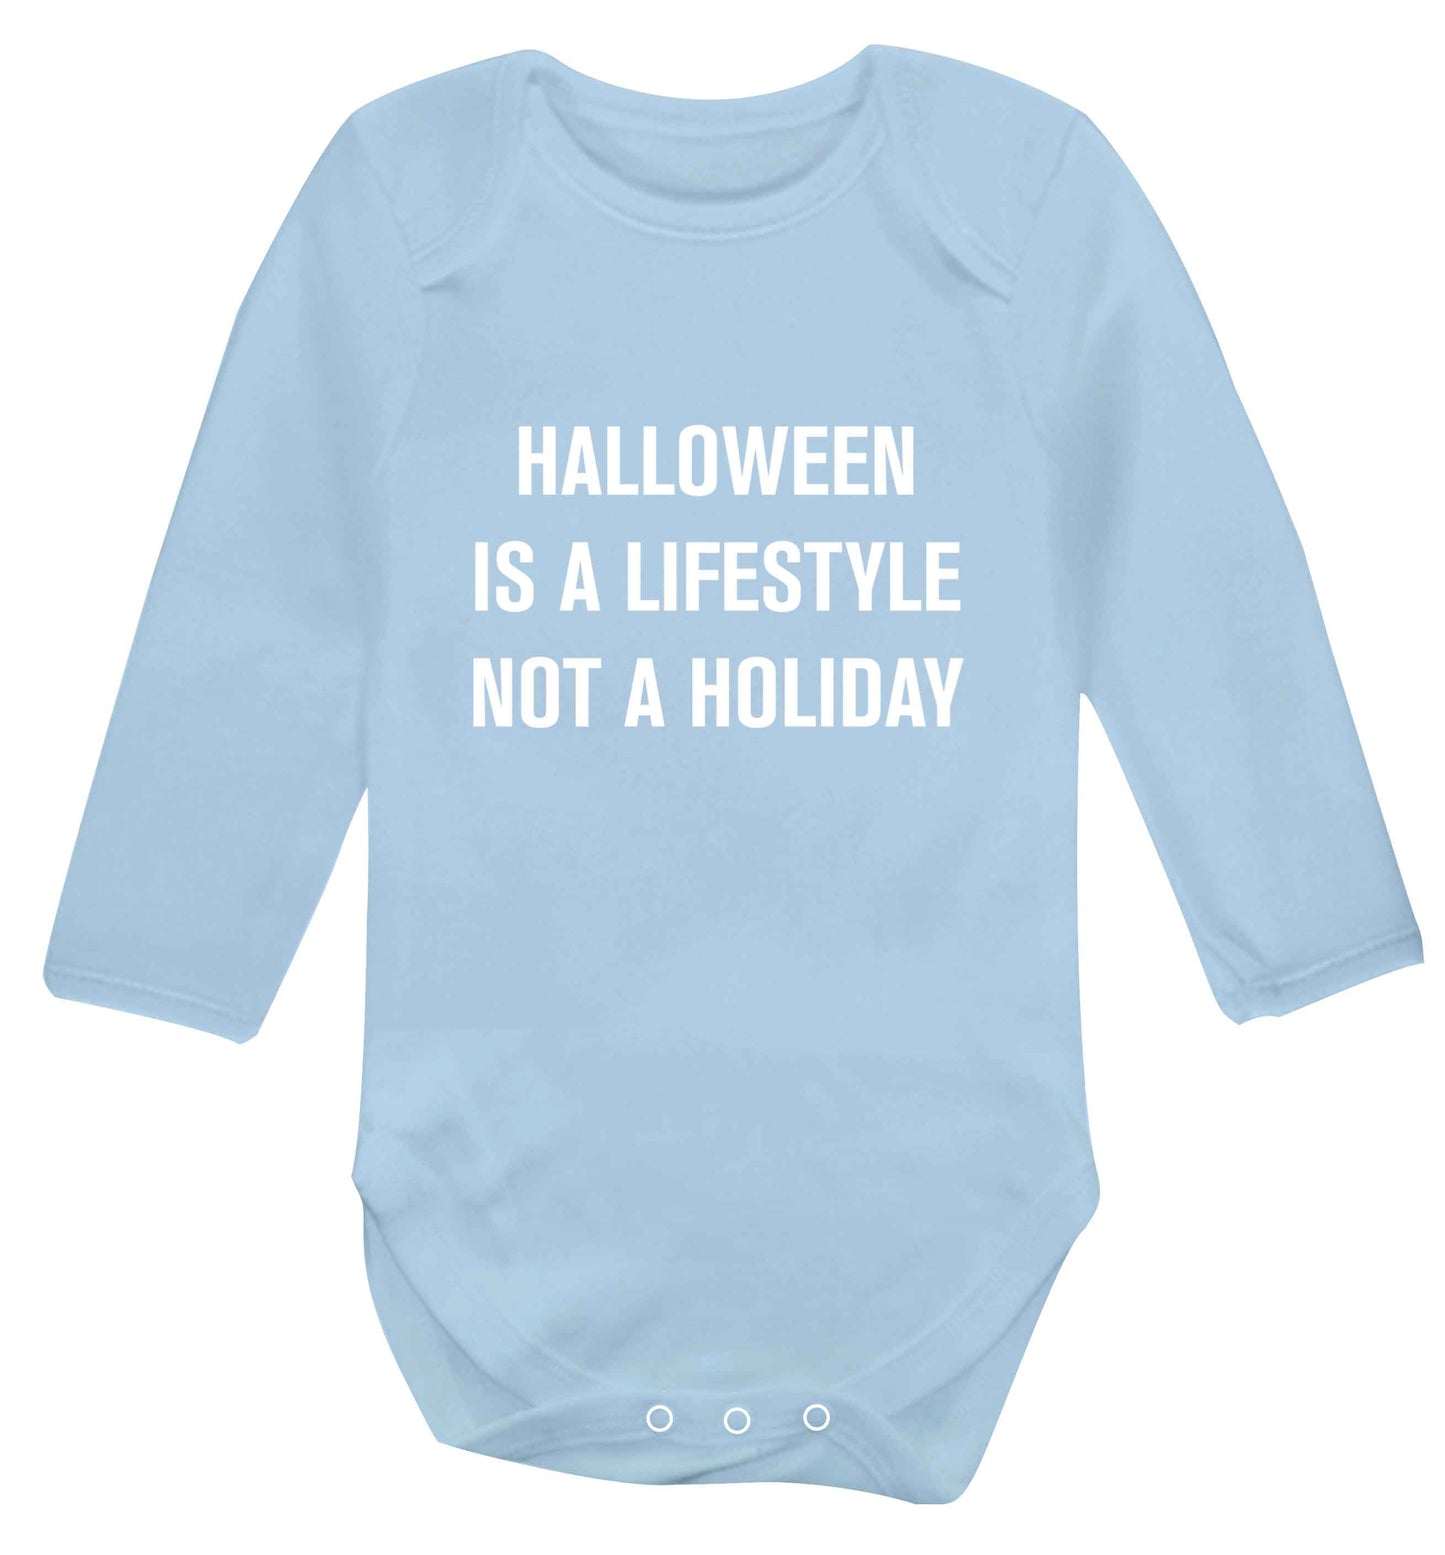 Halloween is a lifestyle not a holiday baby vest long sleeved pale blue 6-12 months